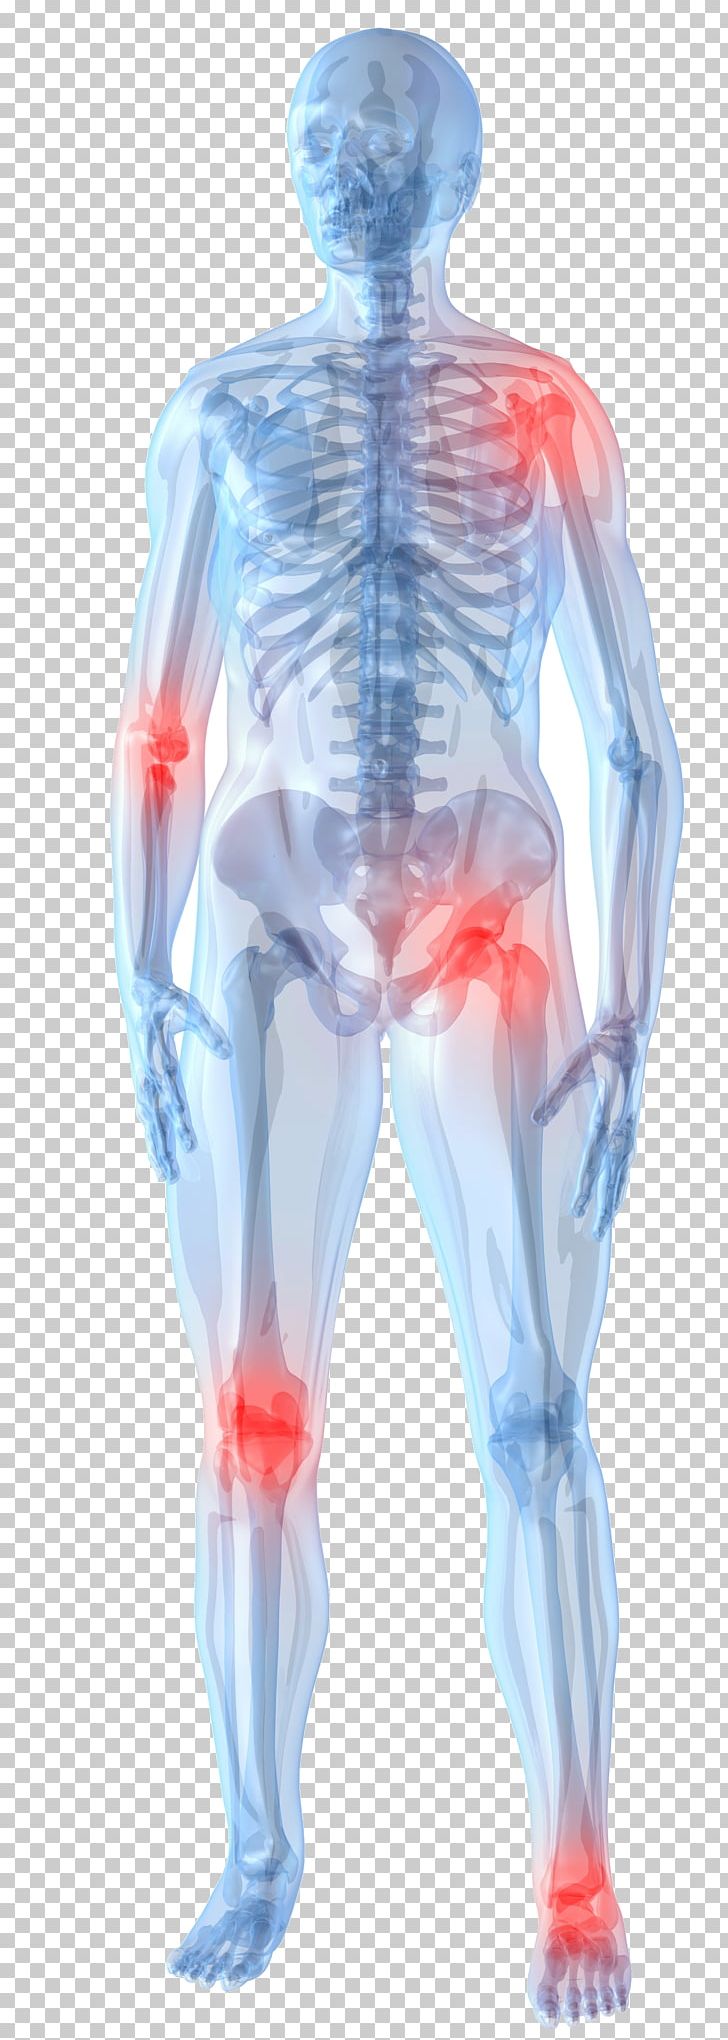 Knee Pain Pain Management Arthritis Joint Pain Therapy PNG, Clipart, Arm, Back Pain, Body Ache, Chest, Chronic Condition Free PNG Download